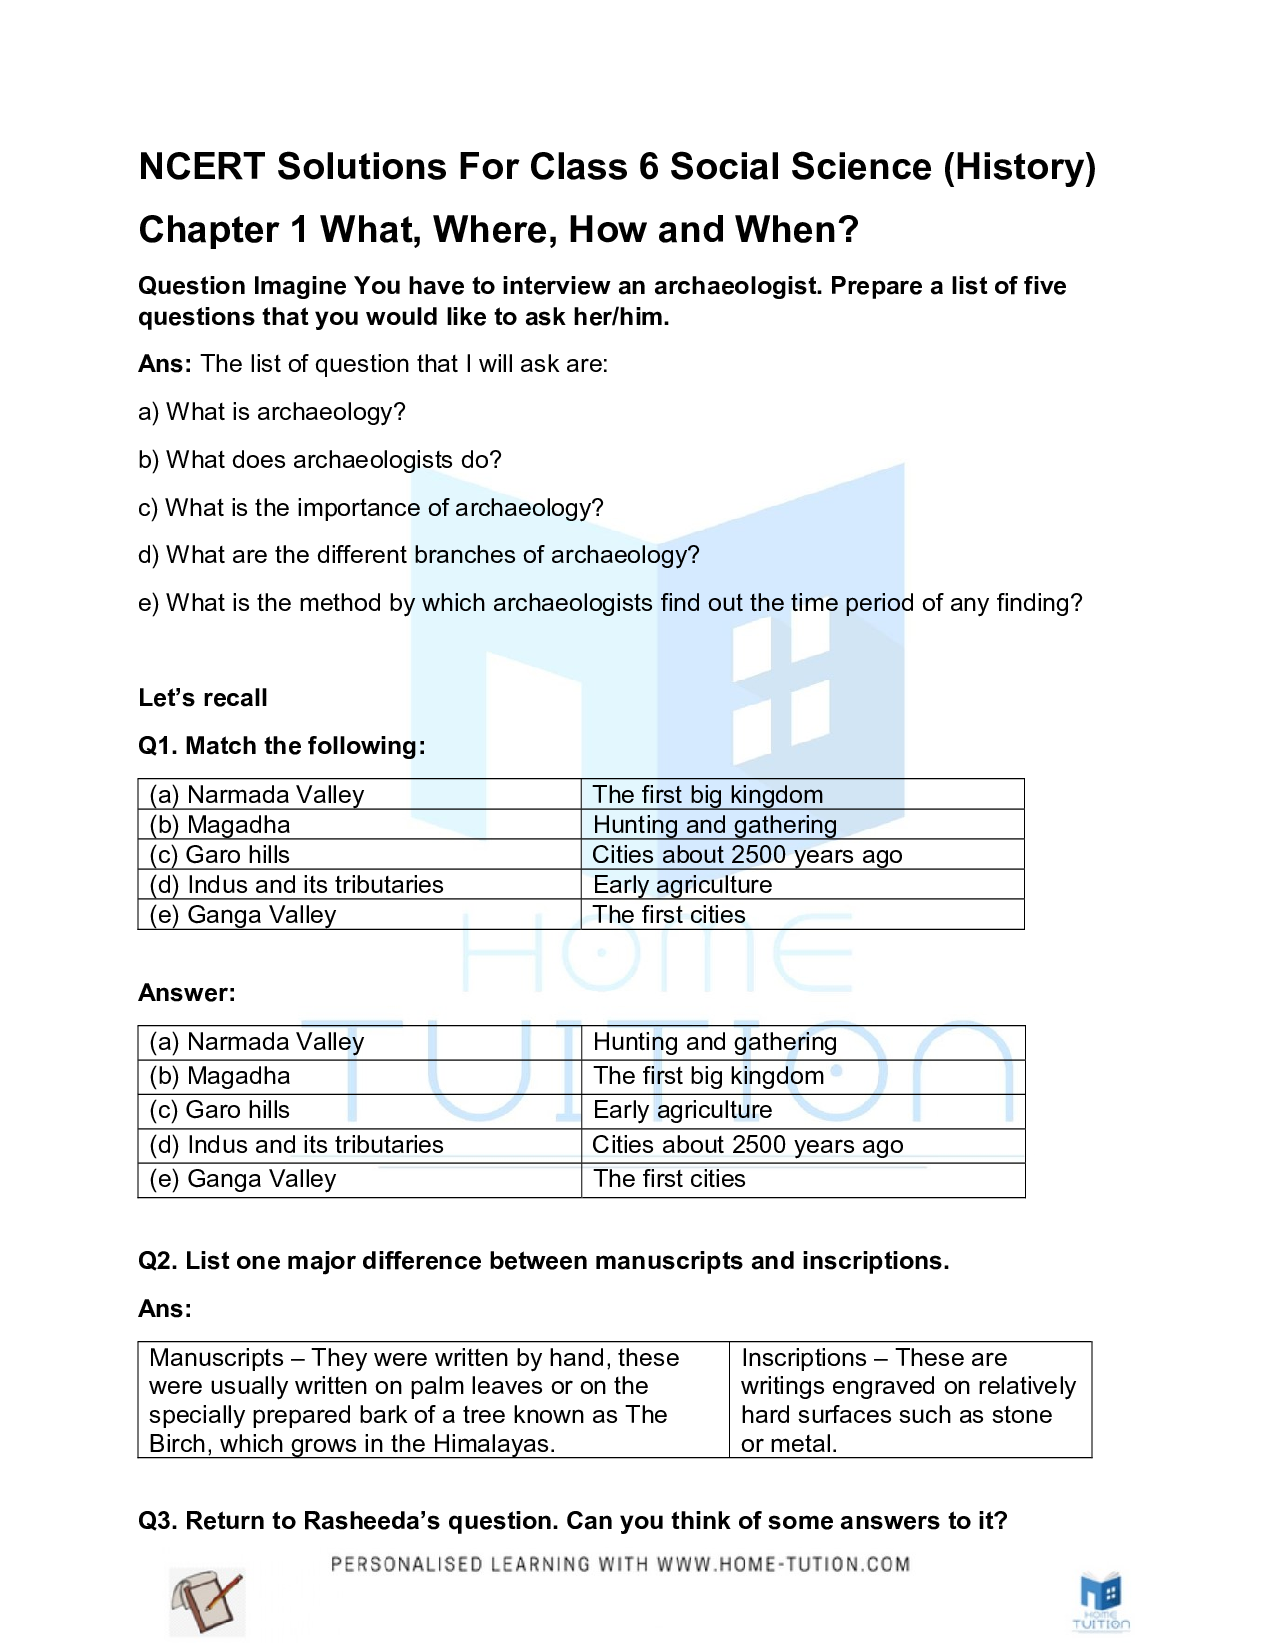 Chapter 1 What, Where How and When?